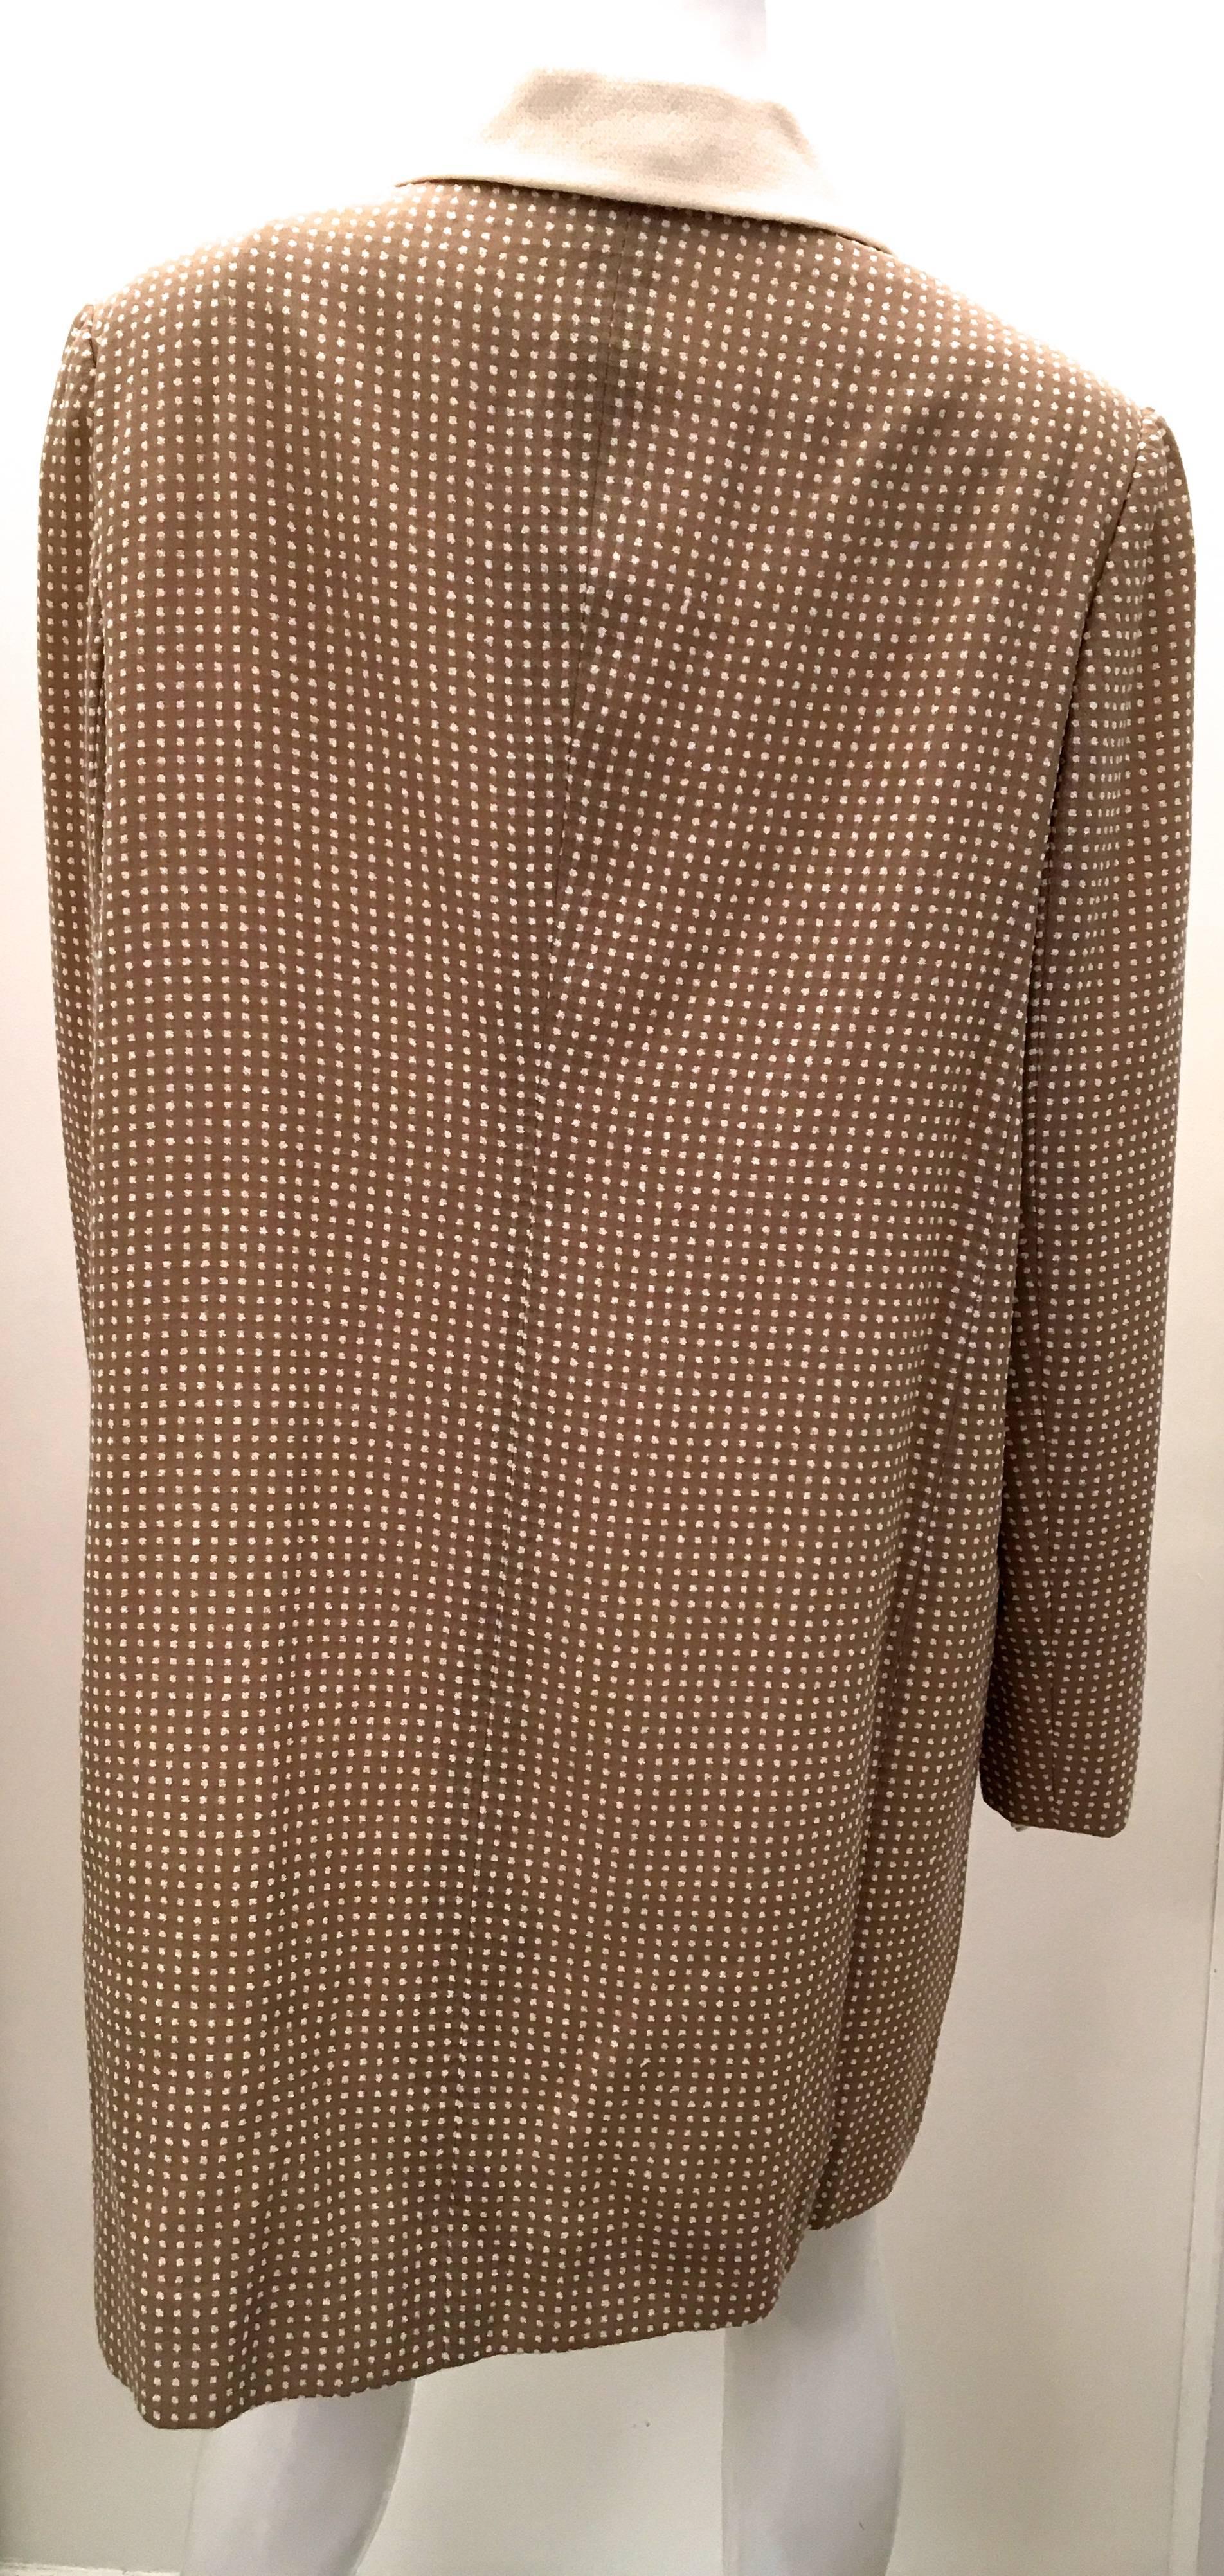 Bill Blass Coat - Beige and White - 1970's In Excellent Condition For Sale In Boca Raton, FL